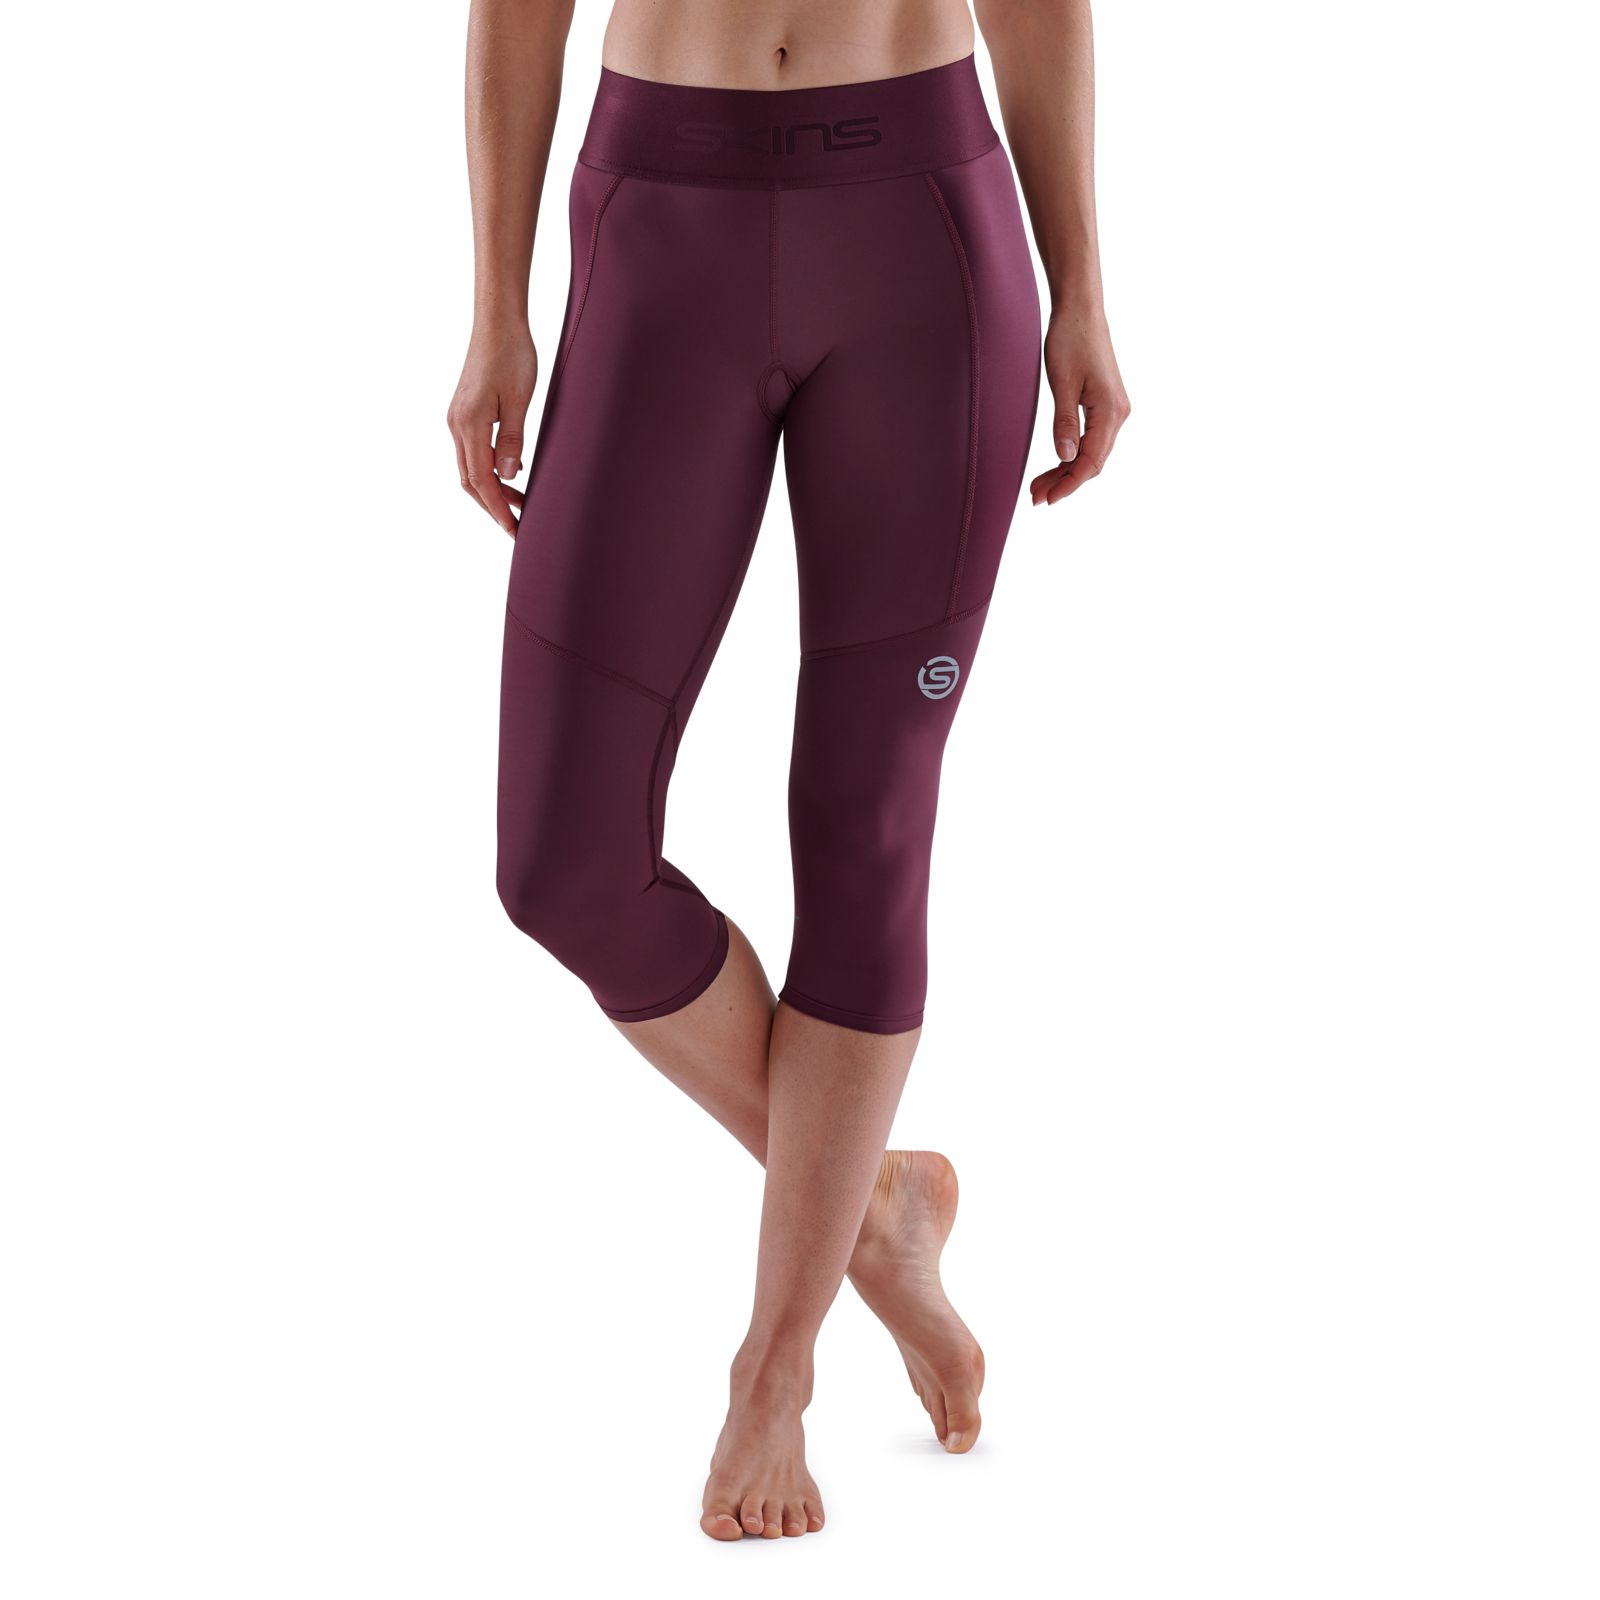 SKINS SERIES-3 WOMEN'S THERMAL 3/4 TIGHTS BURGUNDY - SKINS Compression USA